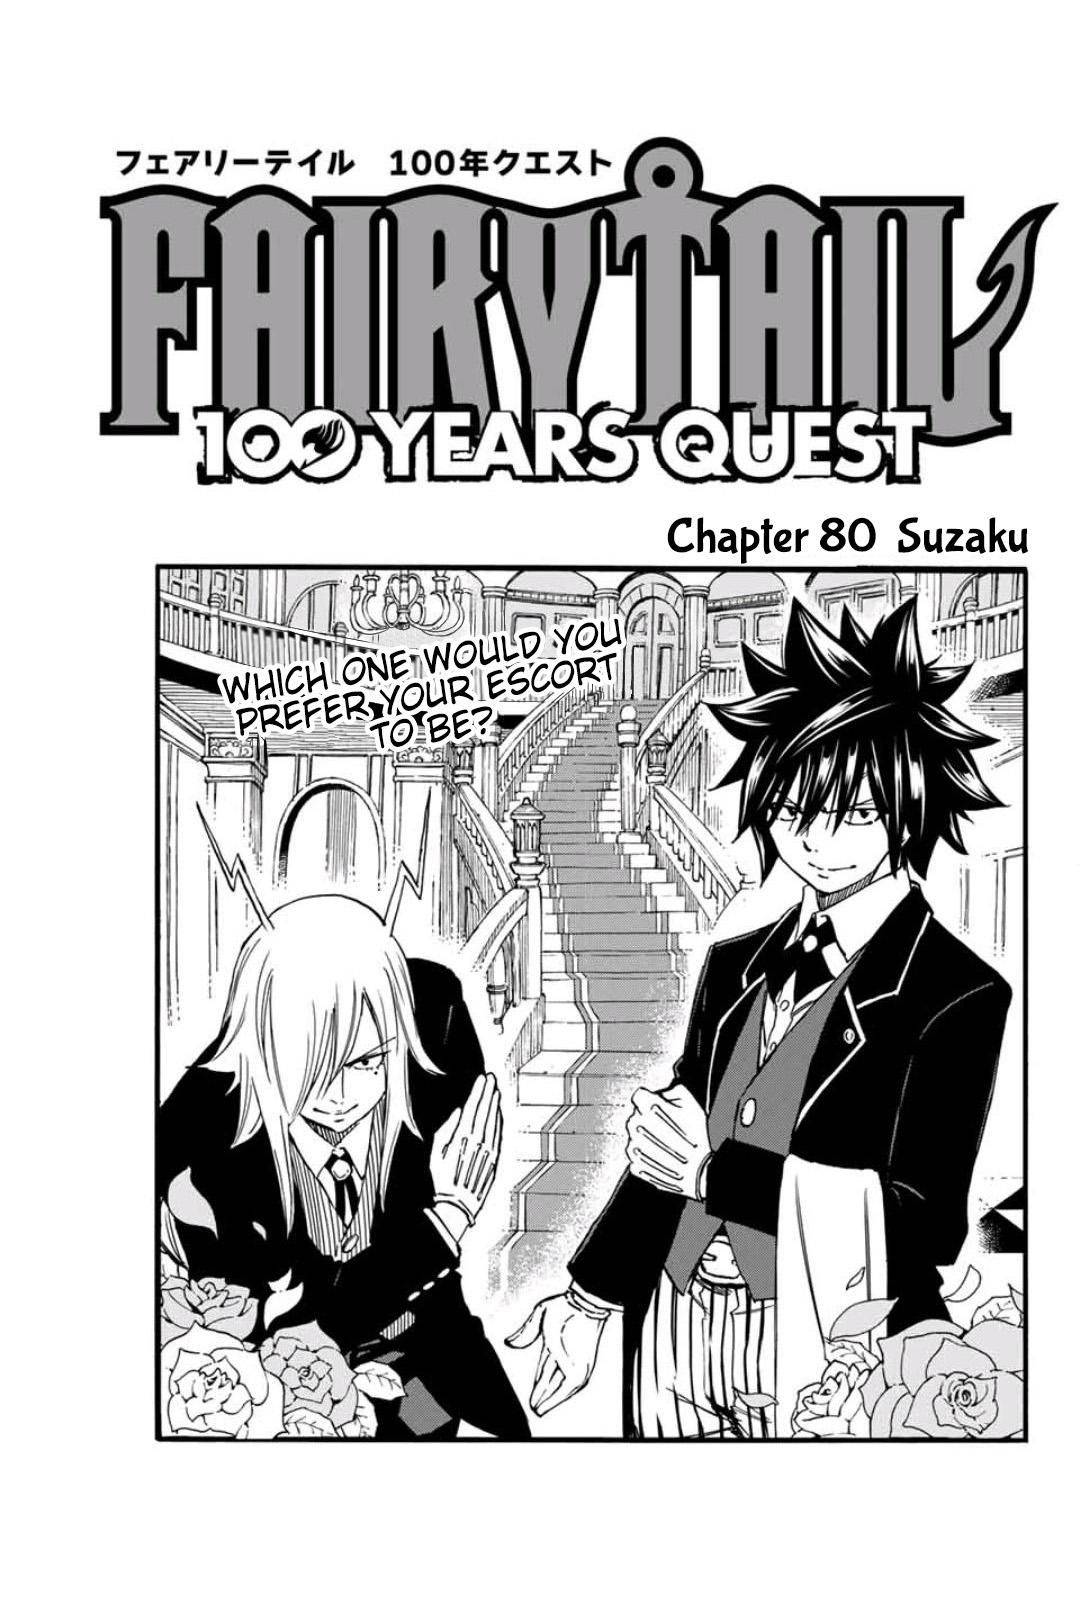 Read Fairy Tail 100 Years Quest Manga English New Chapters Online Free Mangaclash